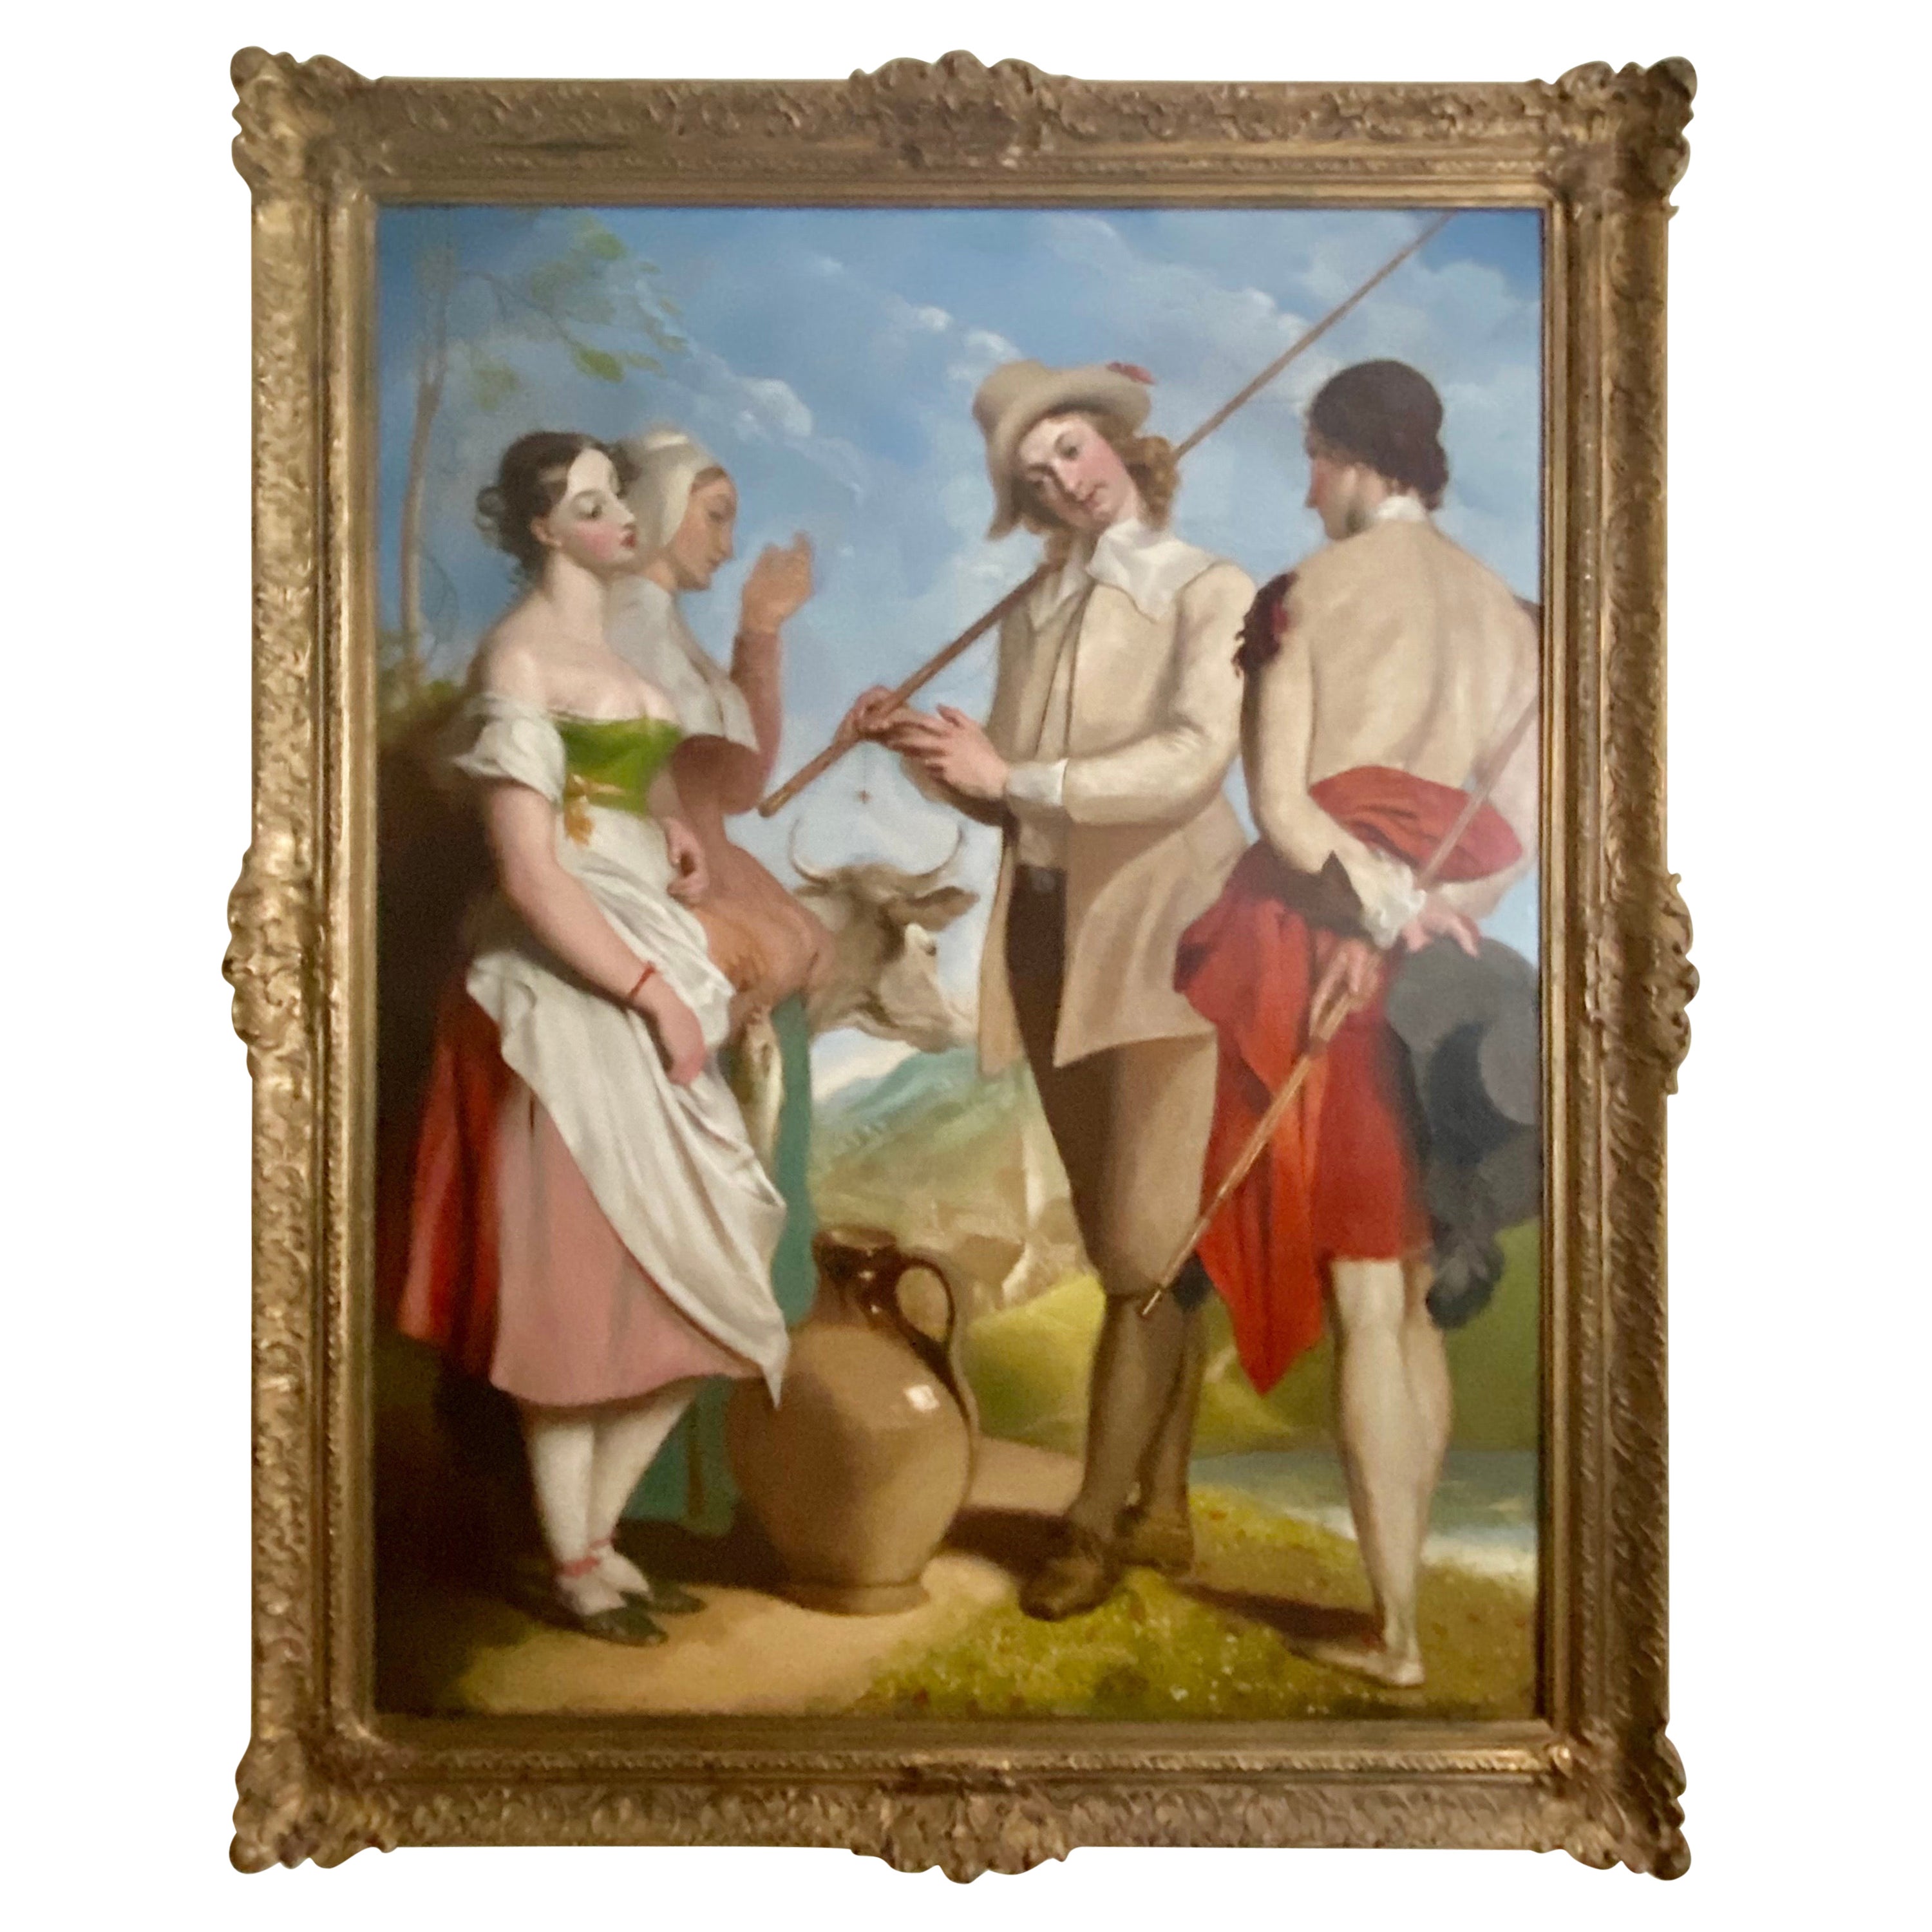 Huge Early 19th Century Oil on Canvas Painting